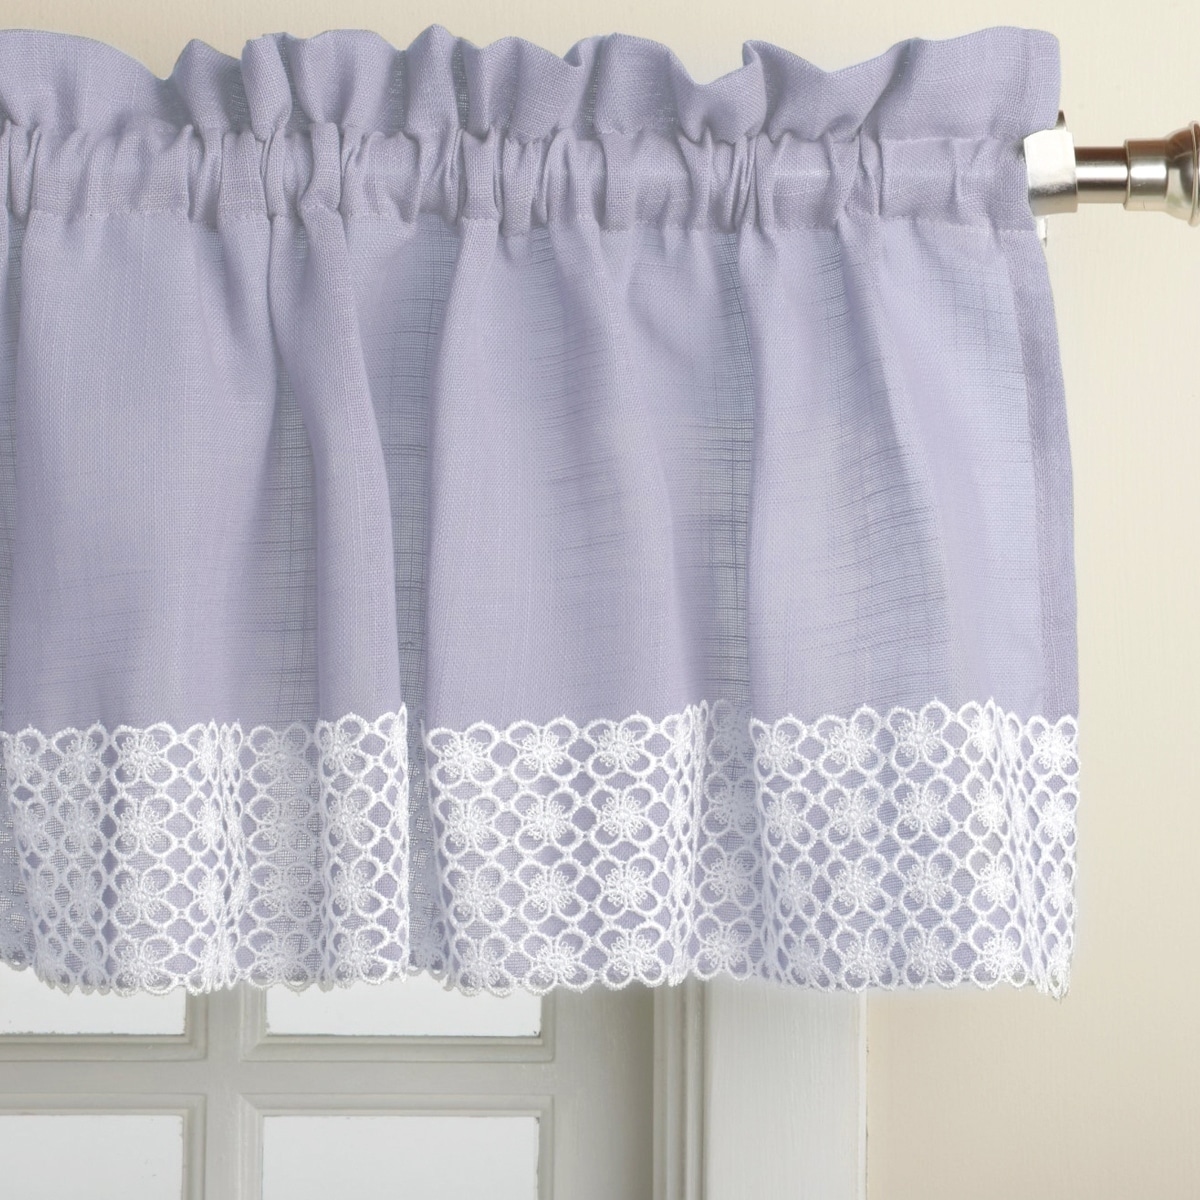 Shop Blue Country Style Kitchen Curtains With White Daisy Lace